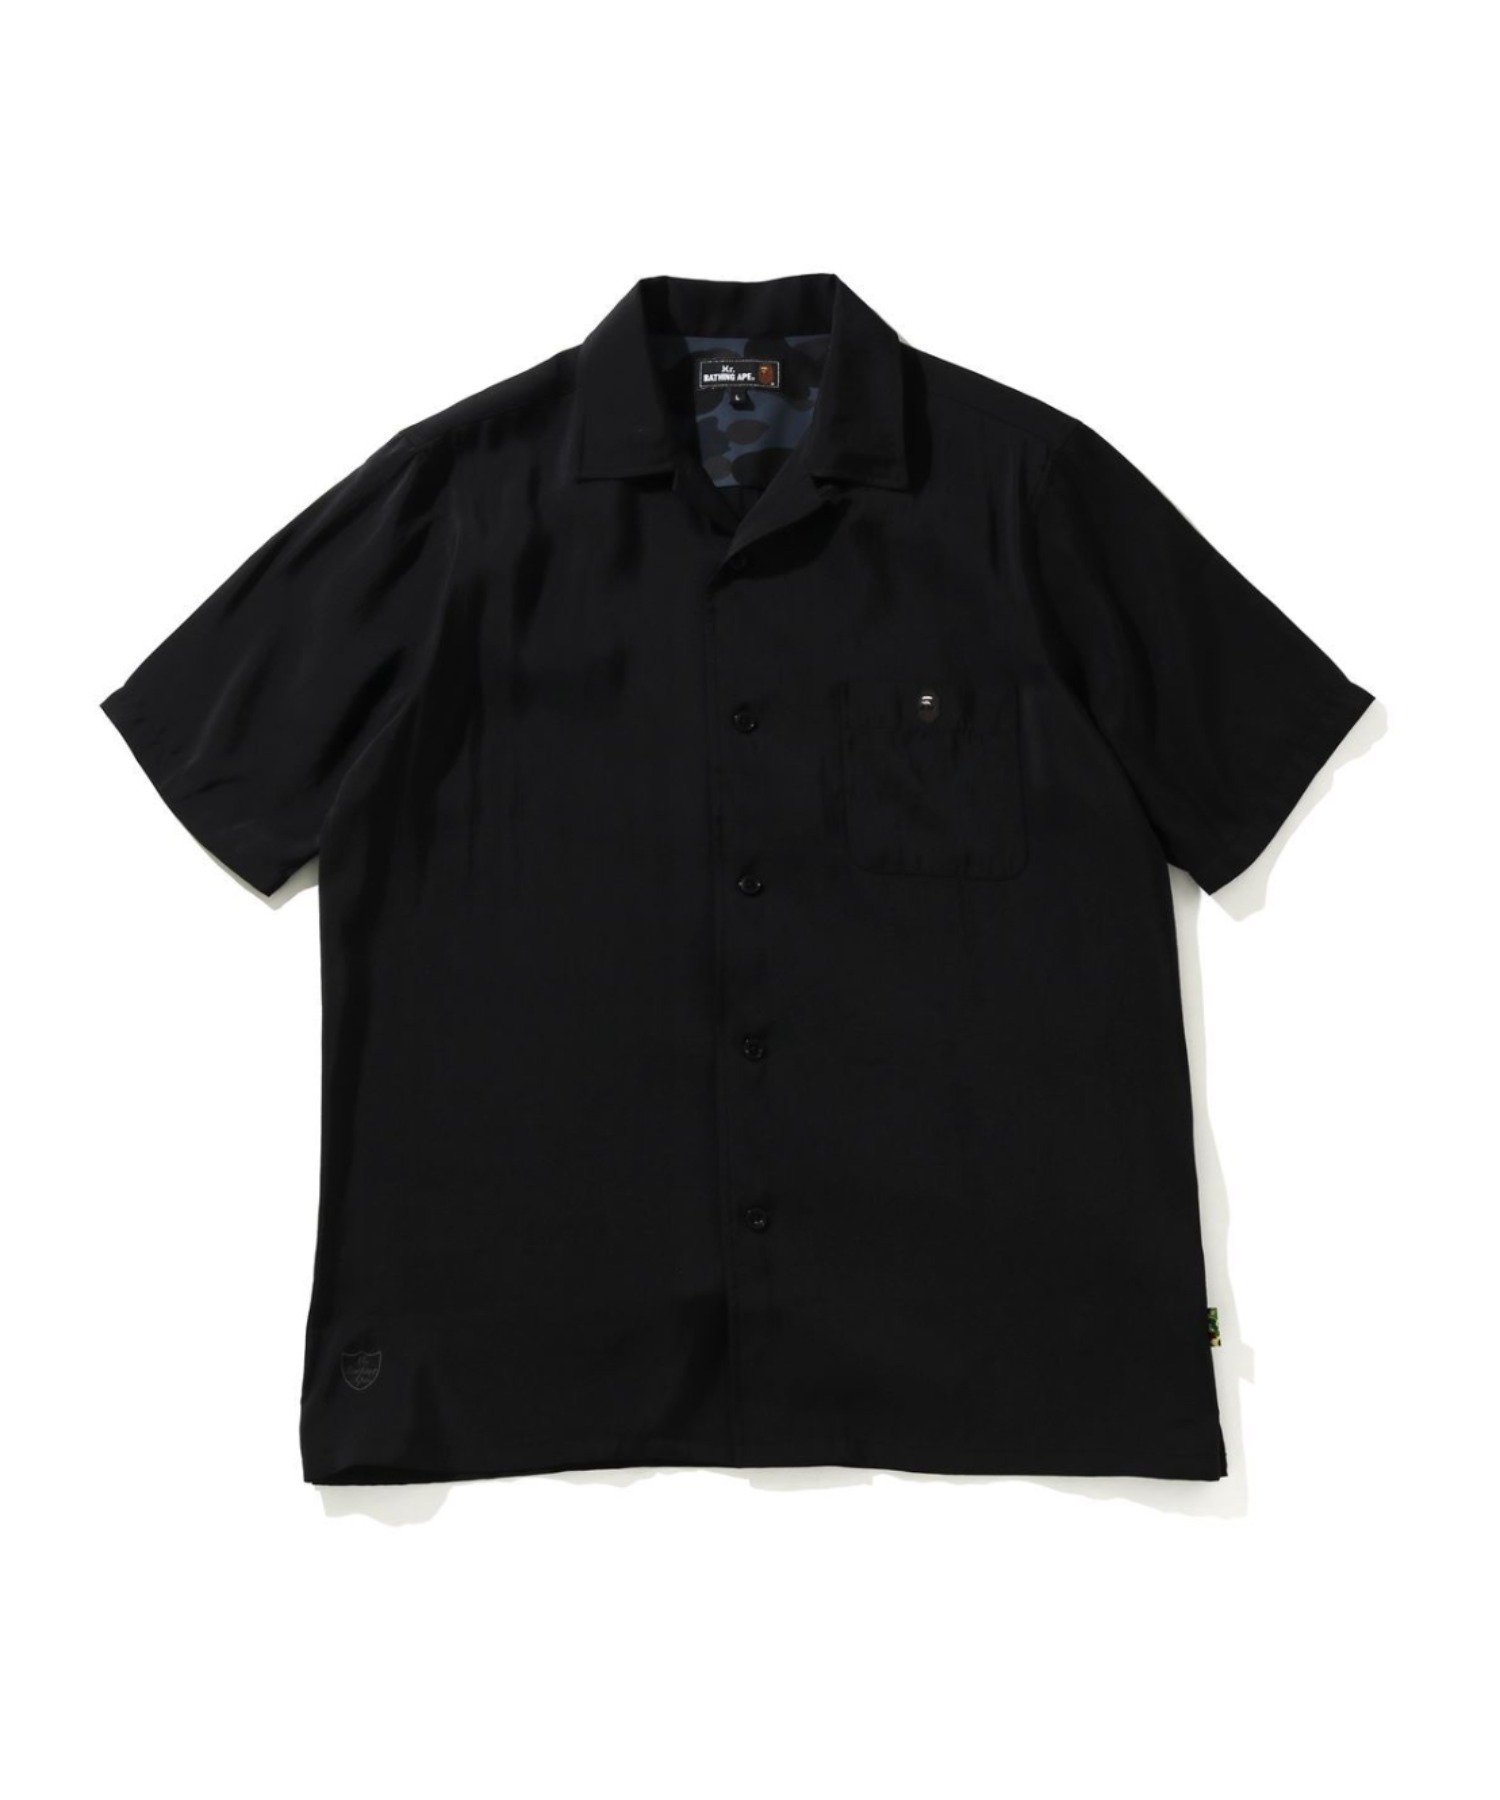 A 【超目玉枠】 BATHING APEONE POINT OPEN COLLAR M S SHIRT